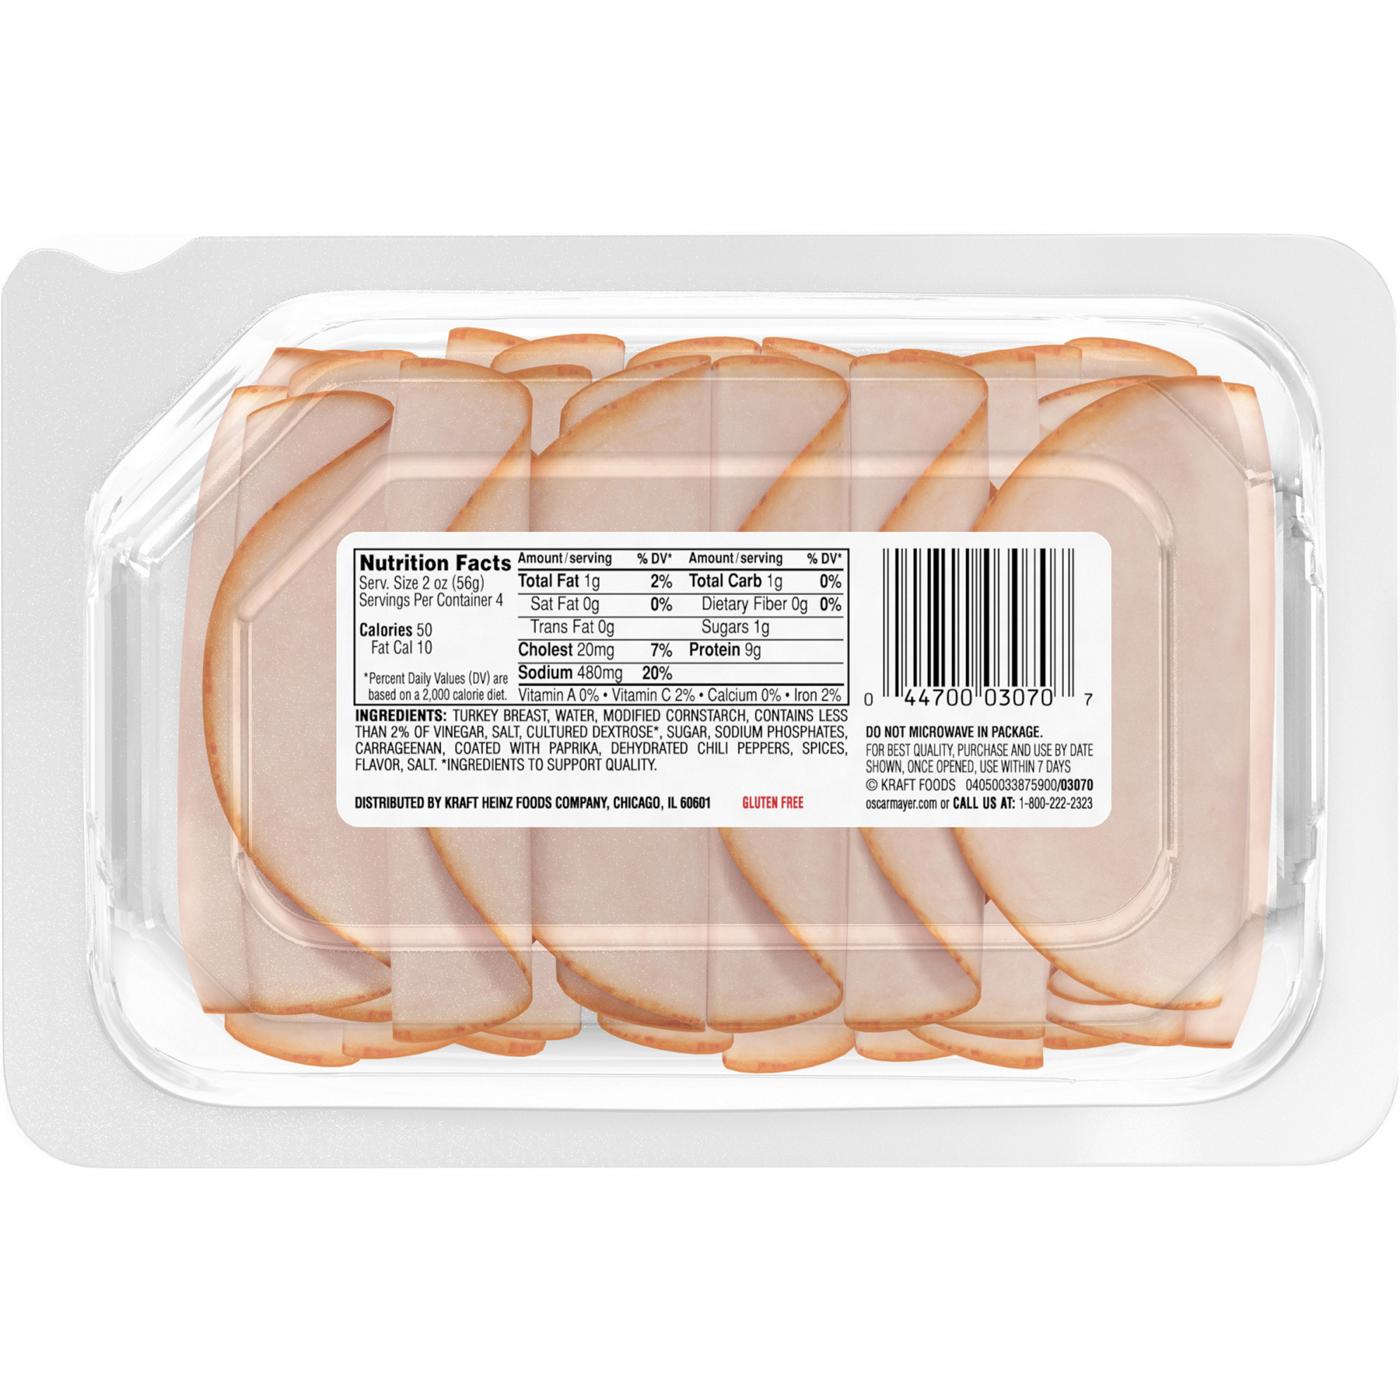 Oscar Mayer Deli Fresh Mesquite Smoked Sliced Turkey Breast Lunch Meat; image 7 of 7